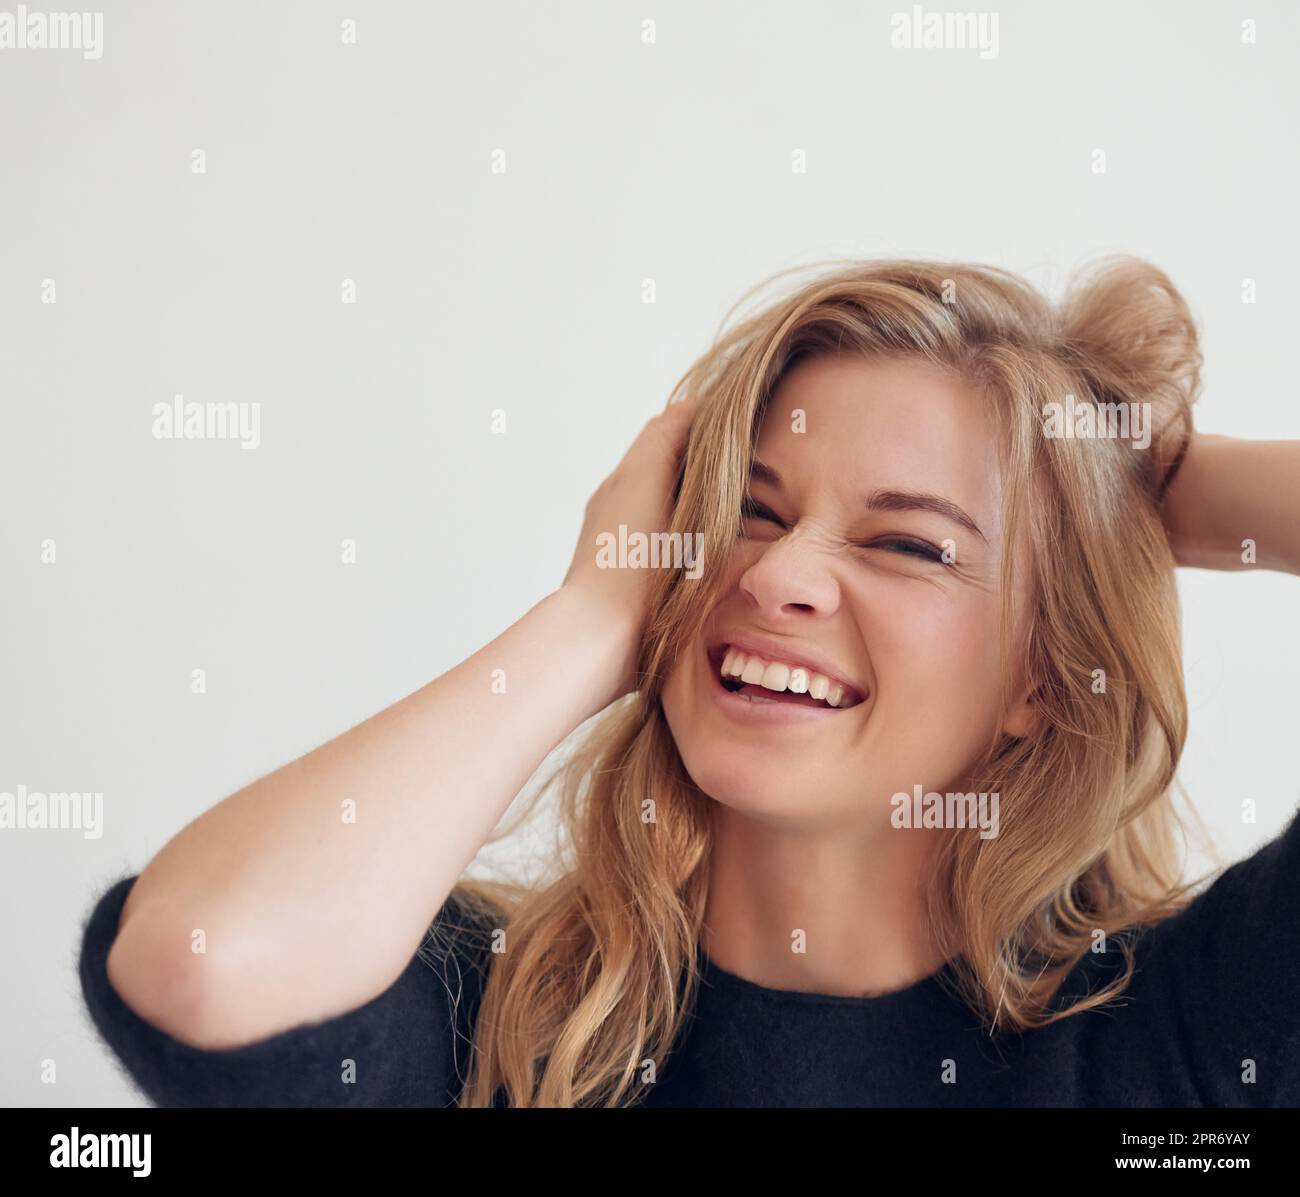 Love is in the hair. Shot of a beautiful woman looking ecstatic. Stock Photo